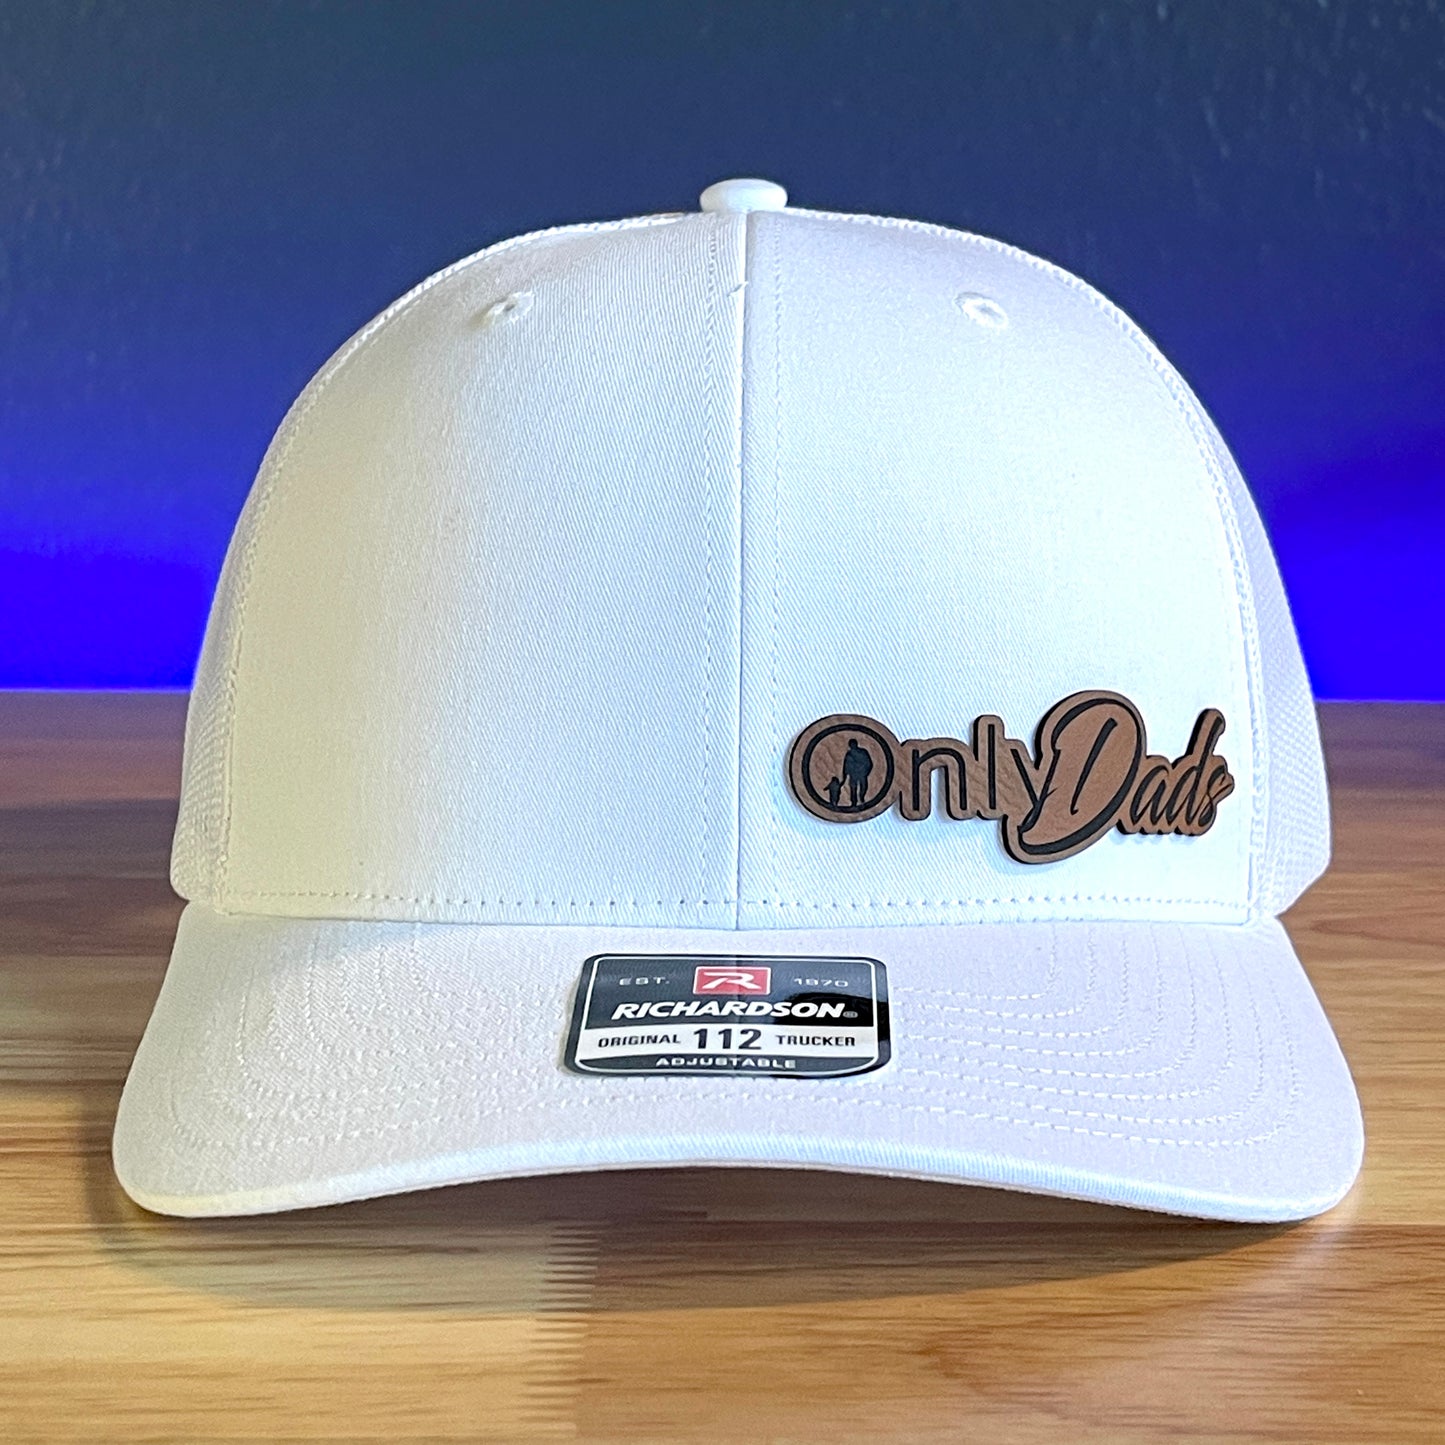 ONLY DADS Funny Leather Patch Trucker Hat White